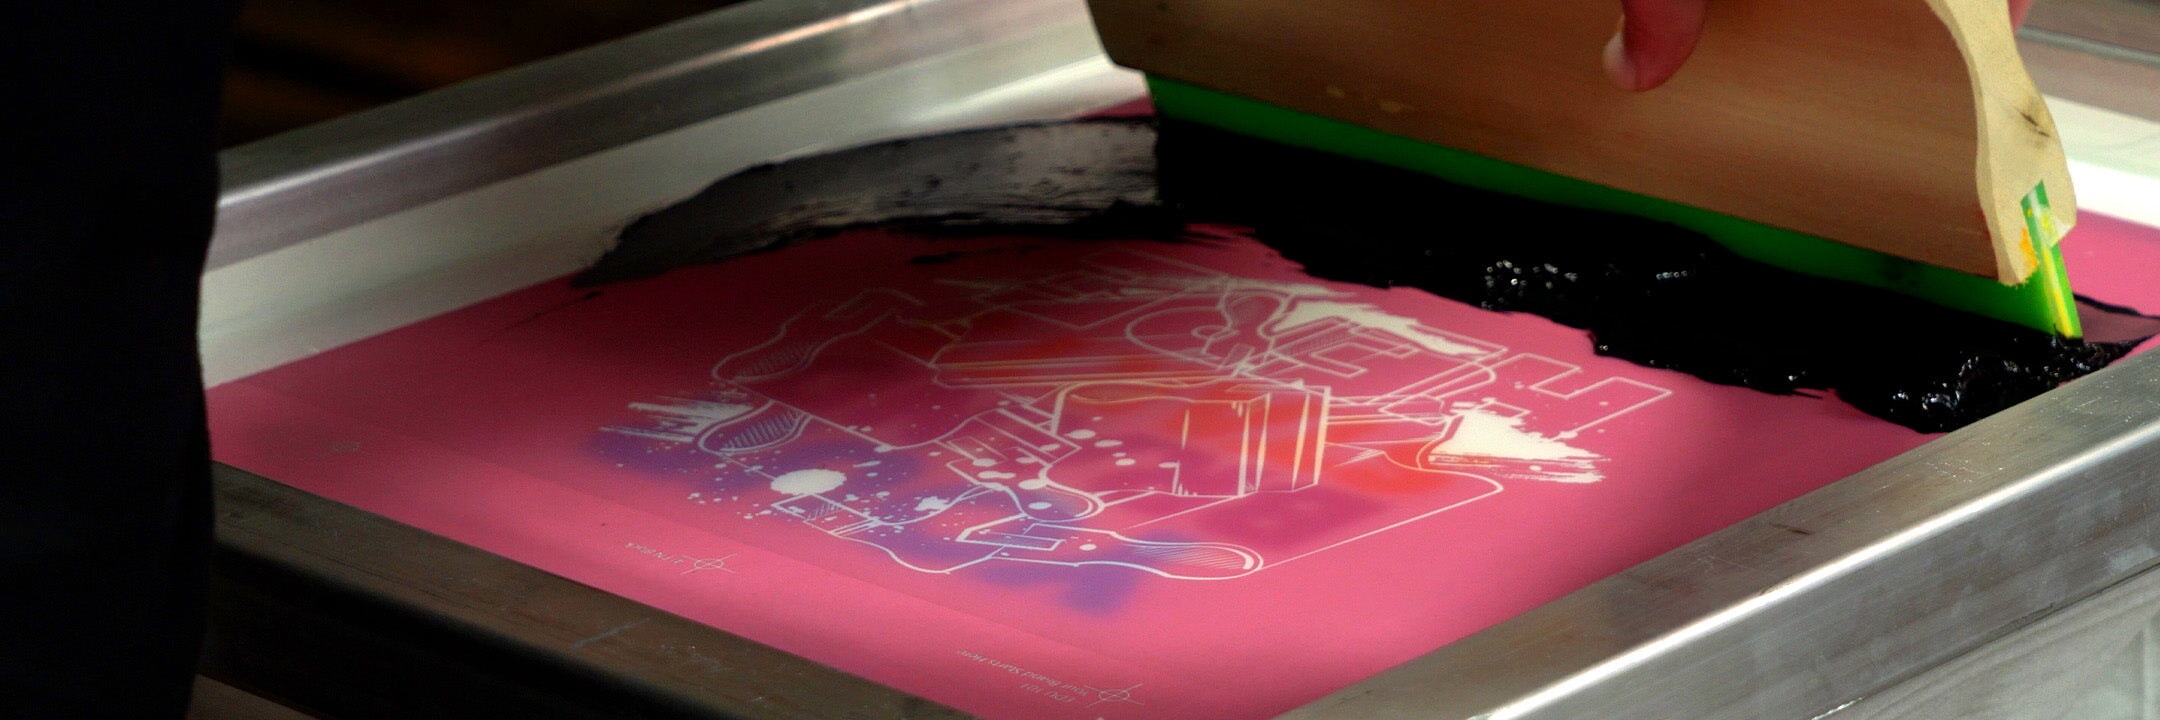 5 Advantages Of Using Heat Transfers For T-Shirt Printing - The T